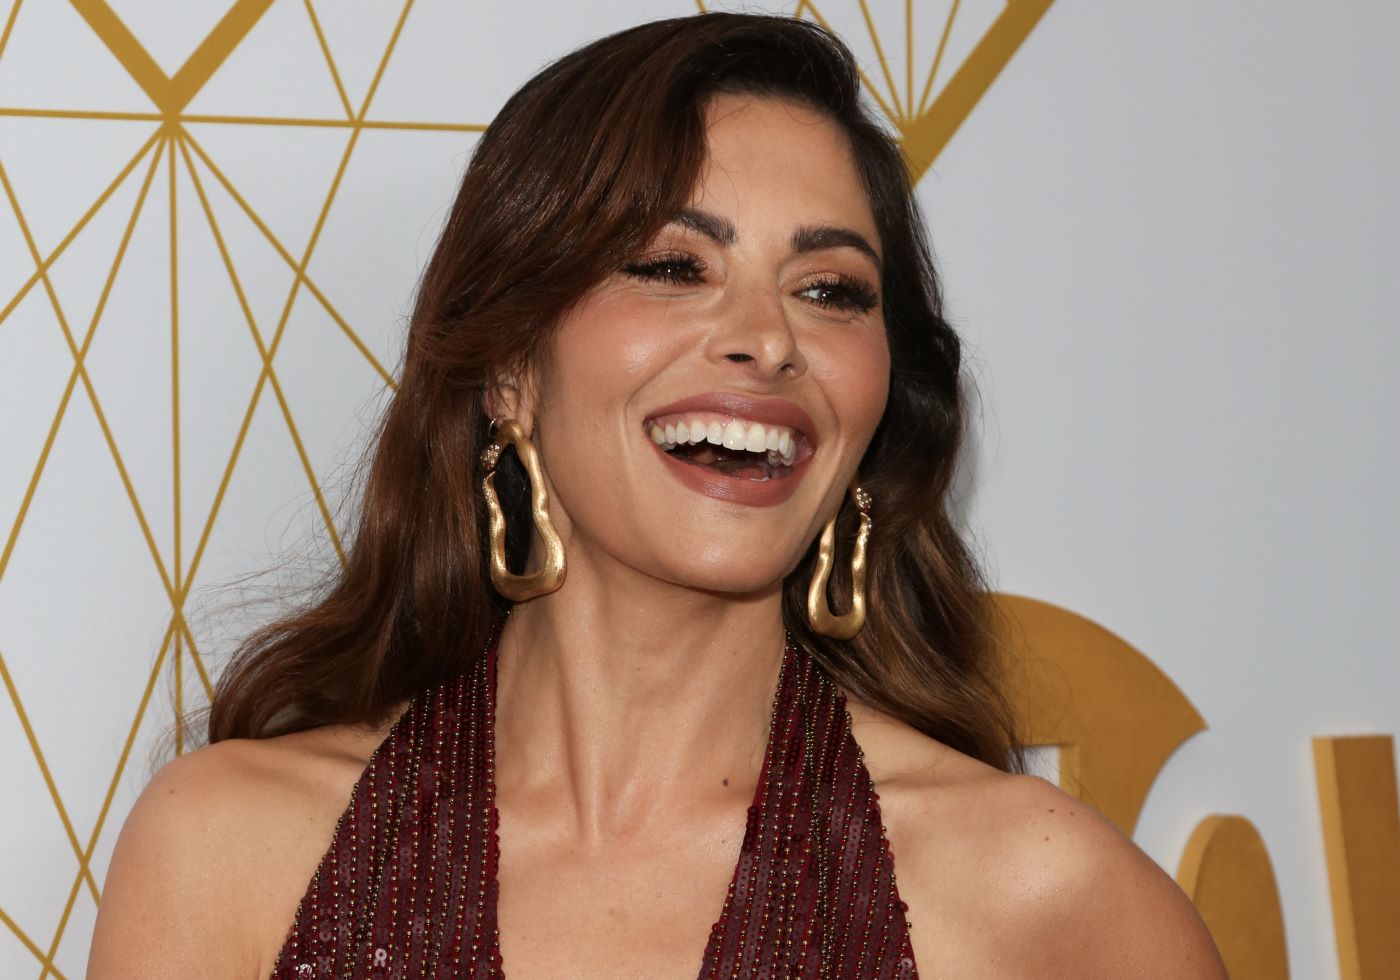 Sarah Shahi in front of a white and gold backdrop wearing a brown halter top and large gold earrings while smiling.